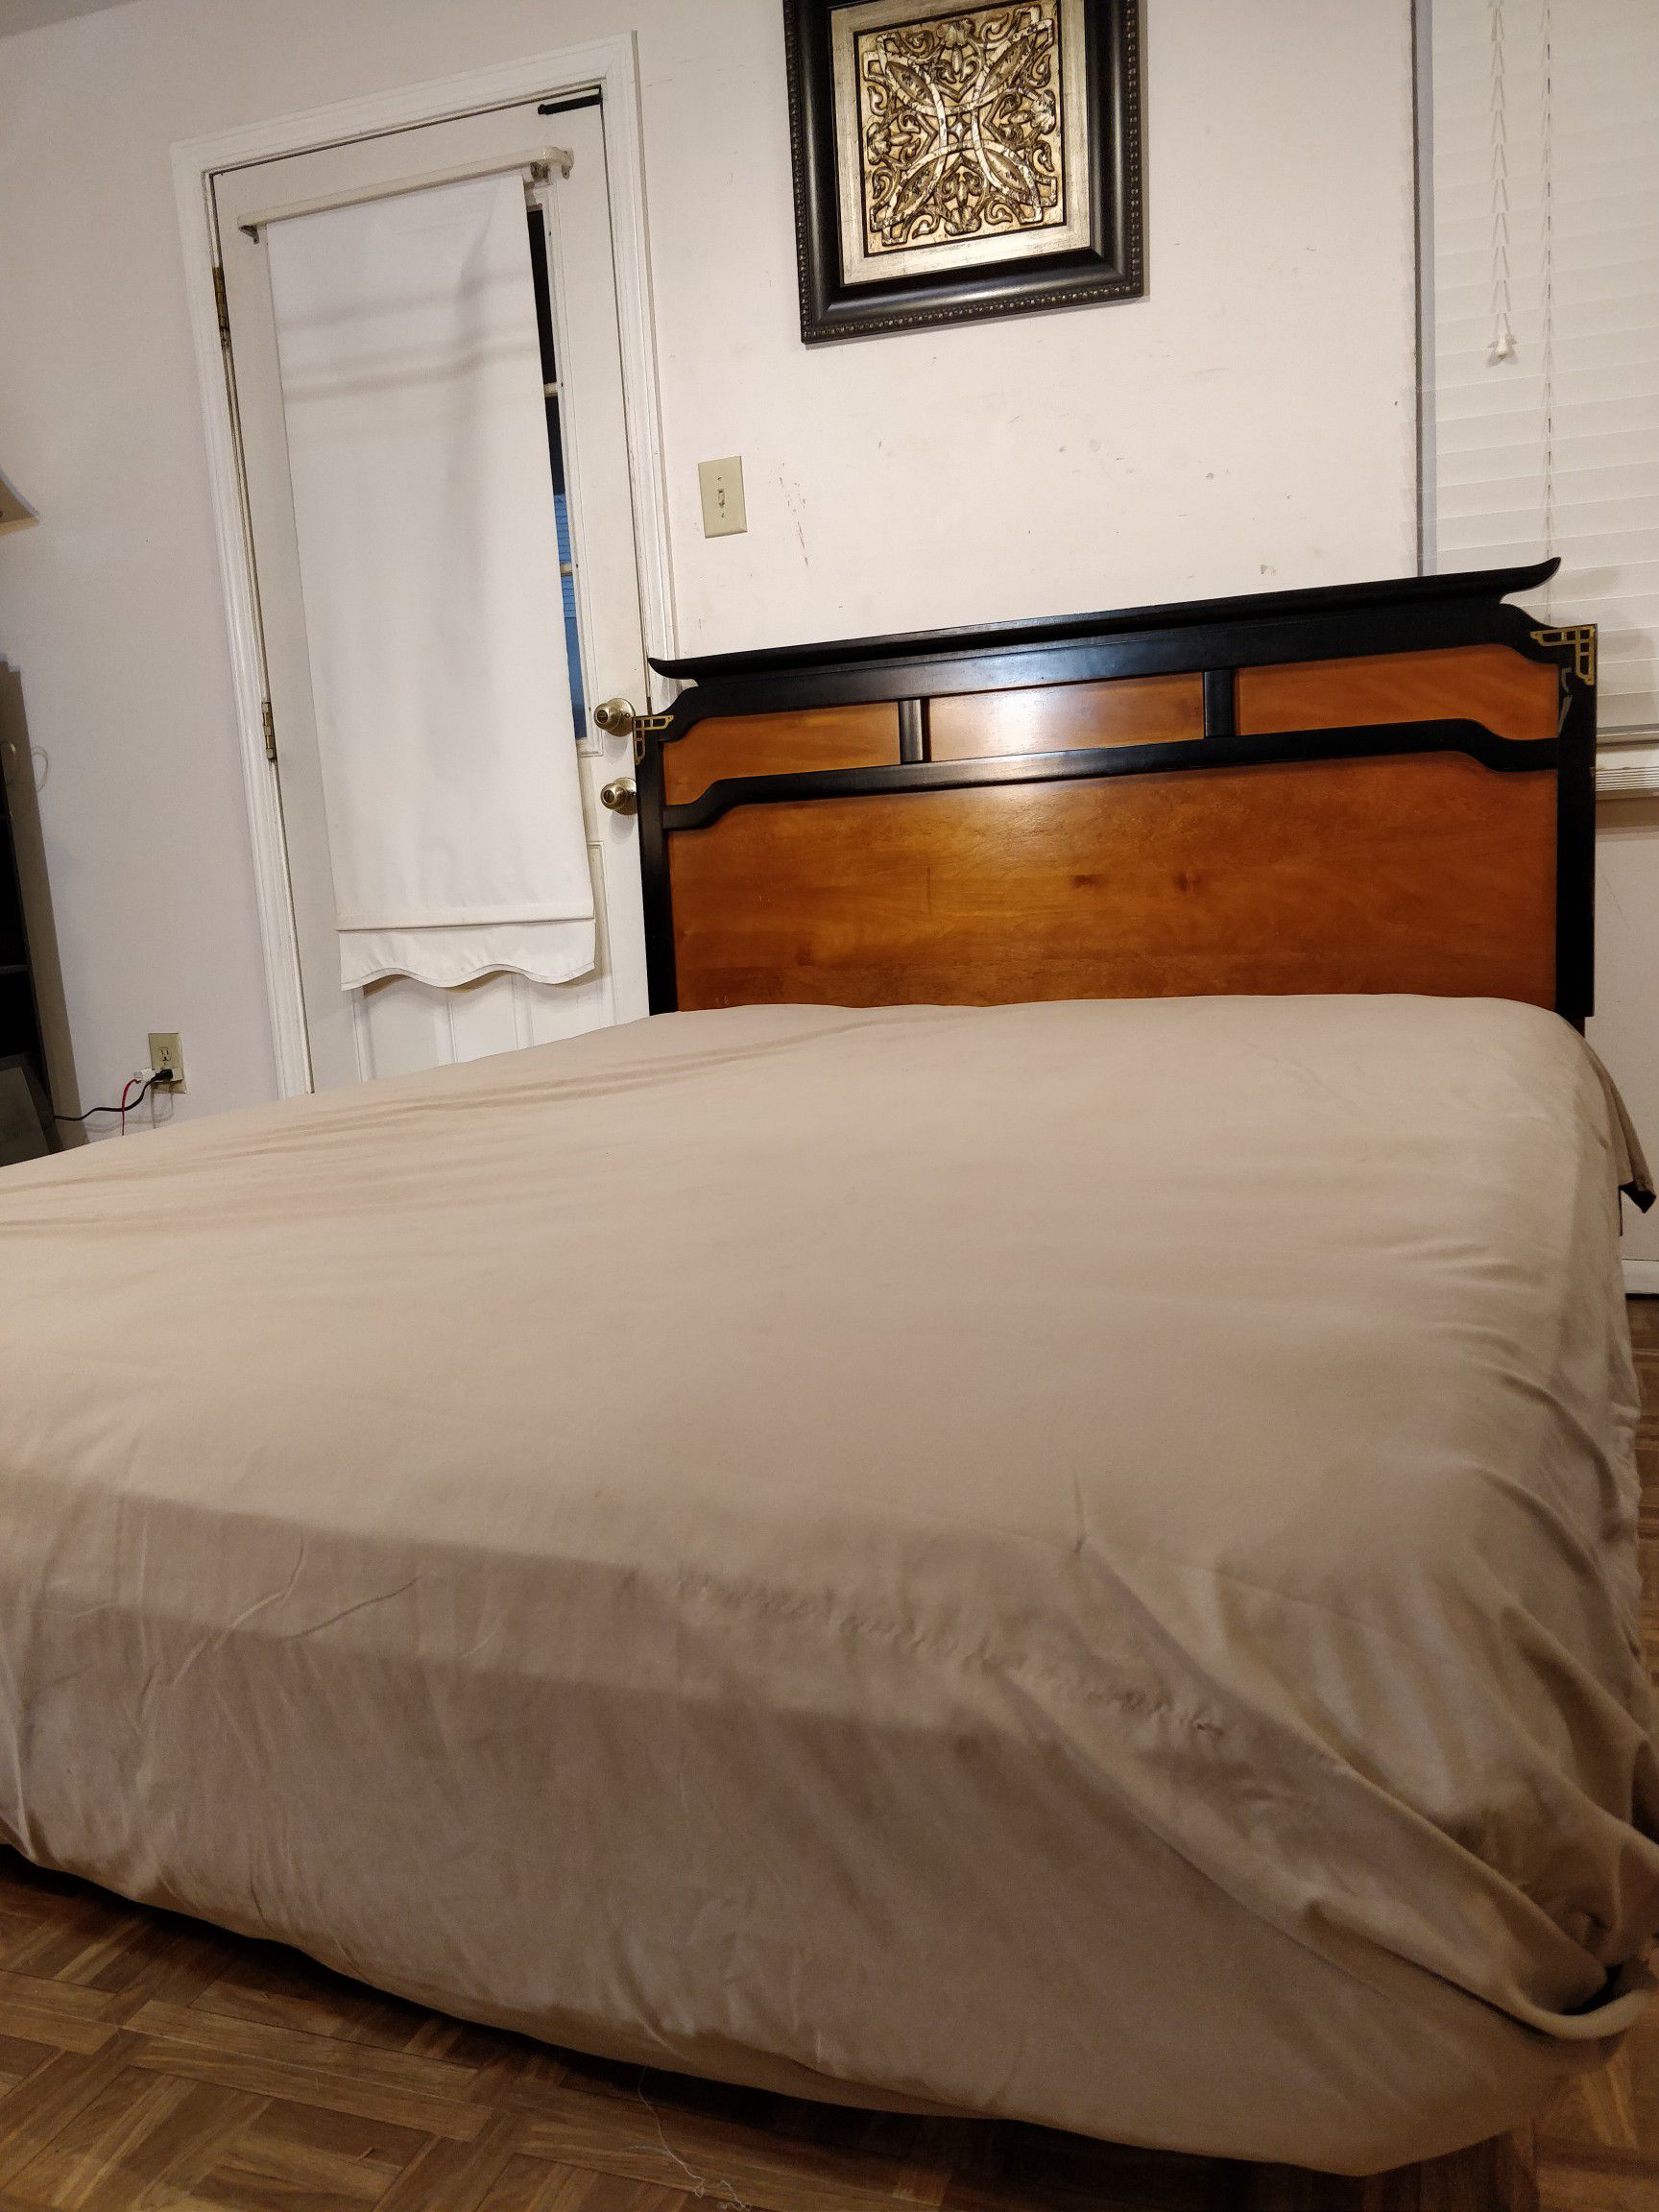 Nice wooden (BASSETT) queen bed frame with box spring and mattress in great condition, made in USA.